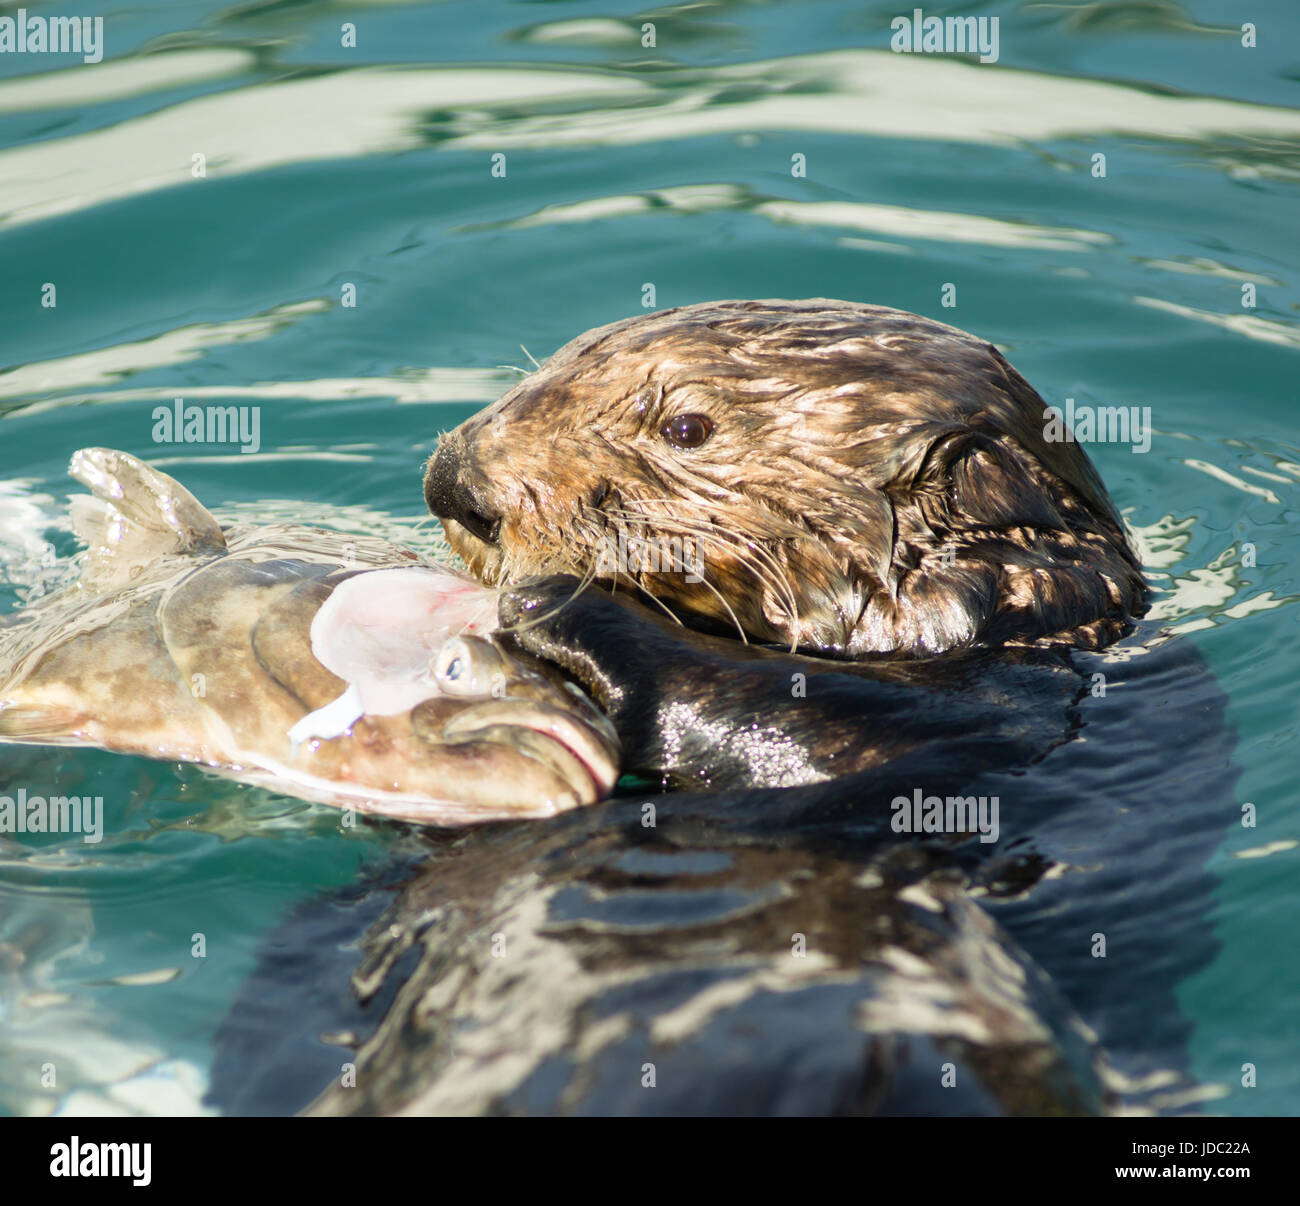 A Sea Otter holds a large fish head on the water's surface Stock Photo